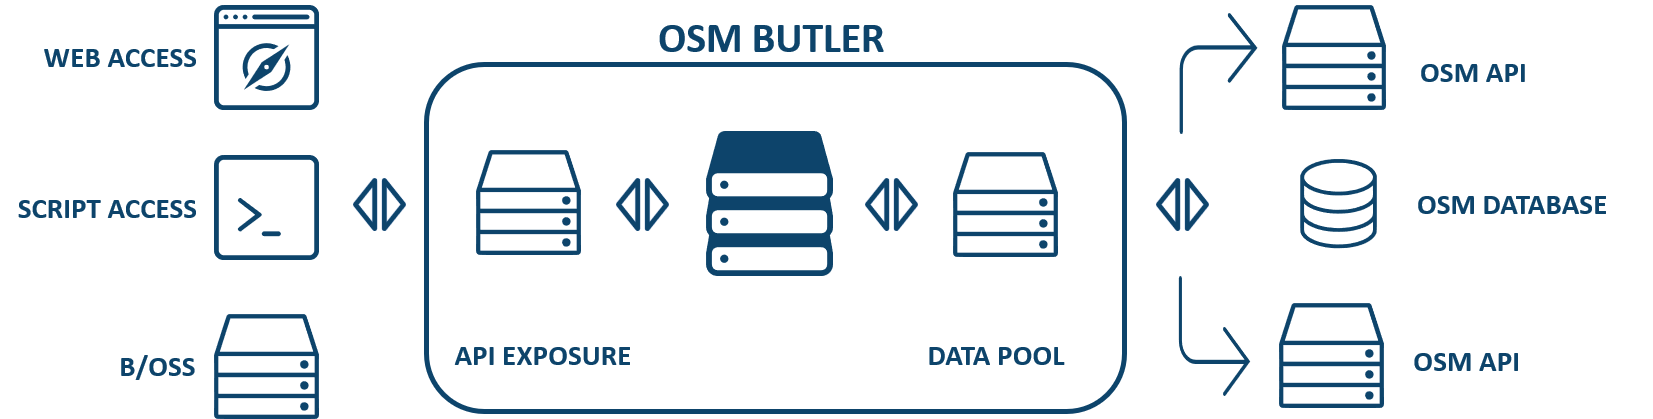 Oracle OSM Butler Architecture